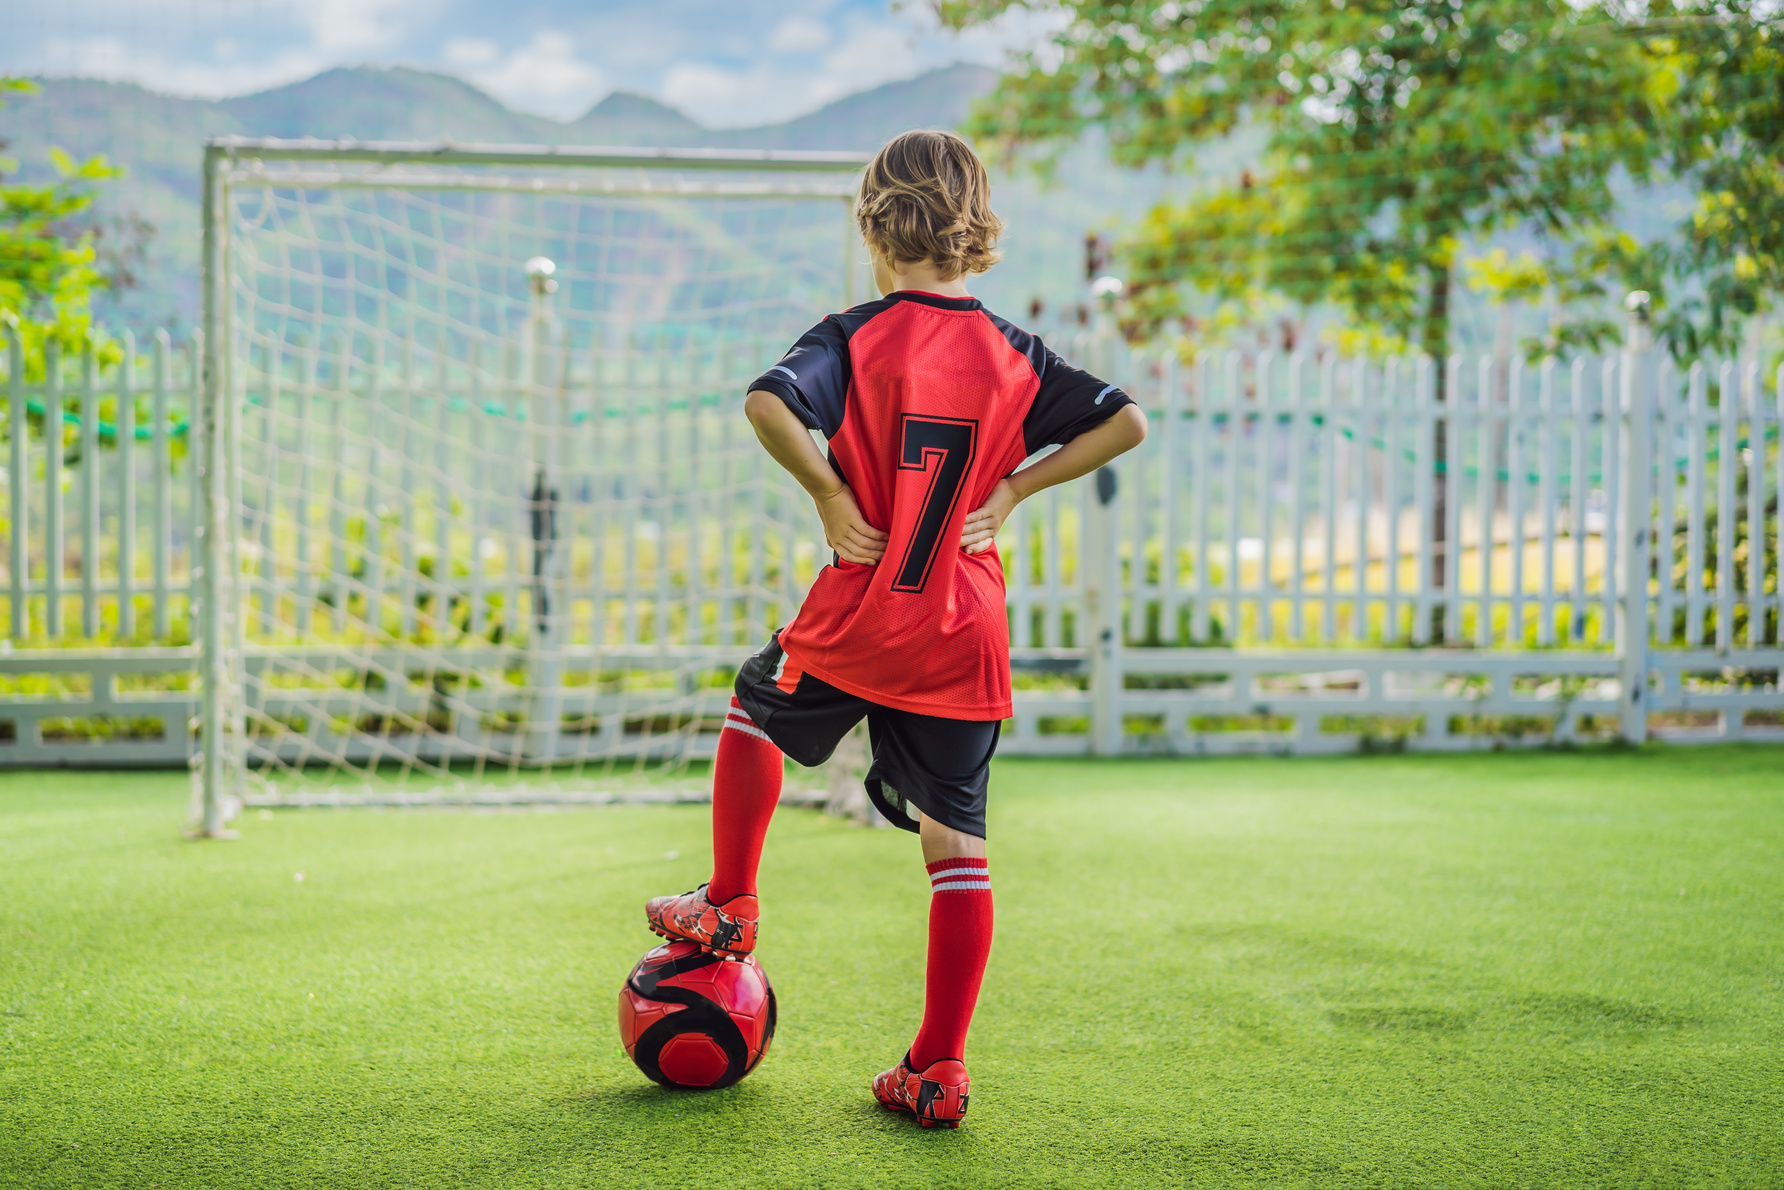  Boy in Red Football Uniform Playing Soccer